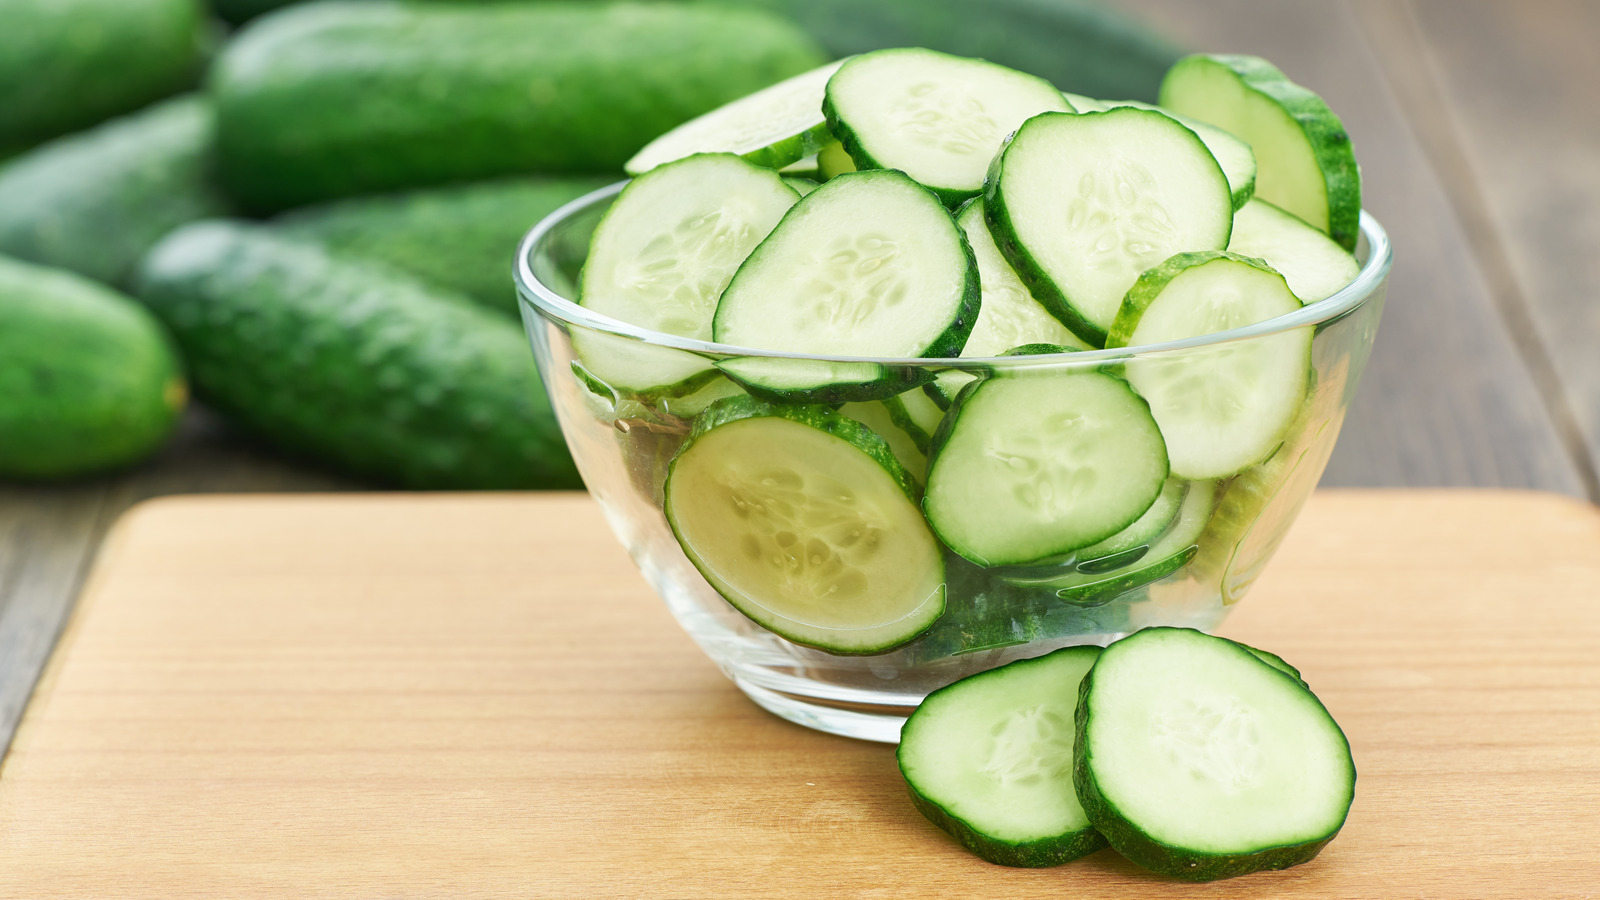 https://www.thedailymeal.com/img/gallery/the-simple-hack-to-bring-weary-cucumbers-back-to-life/l-intro-1687804751.jpg